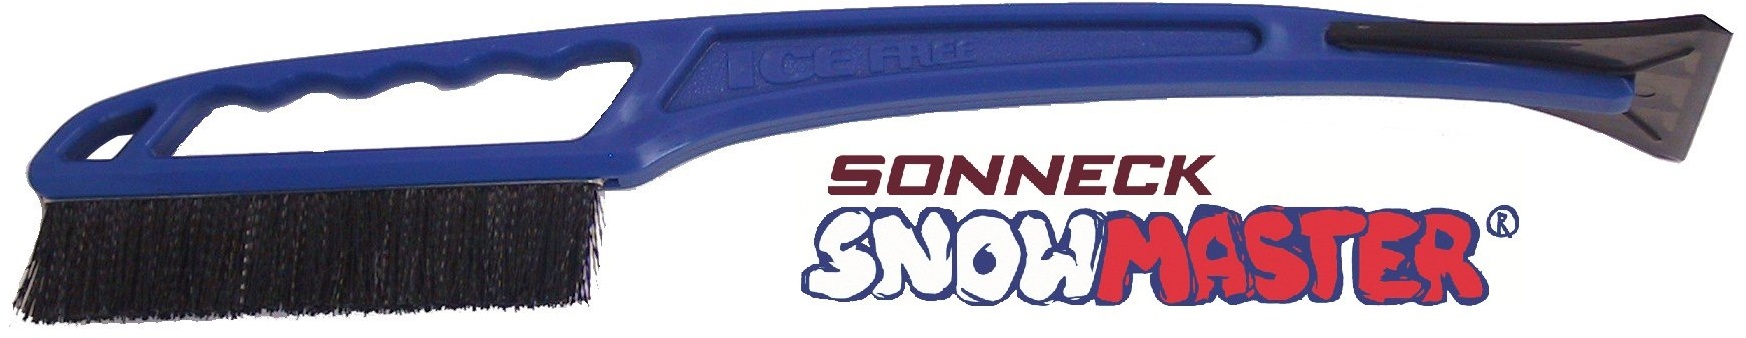 sonneck snowmaster